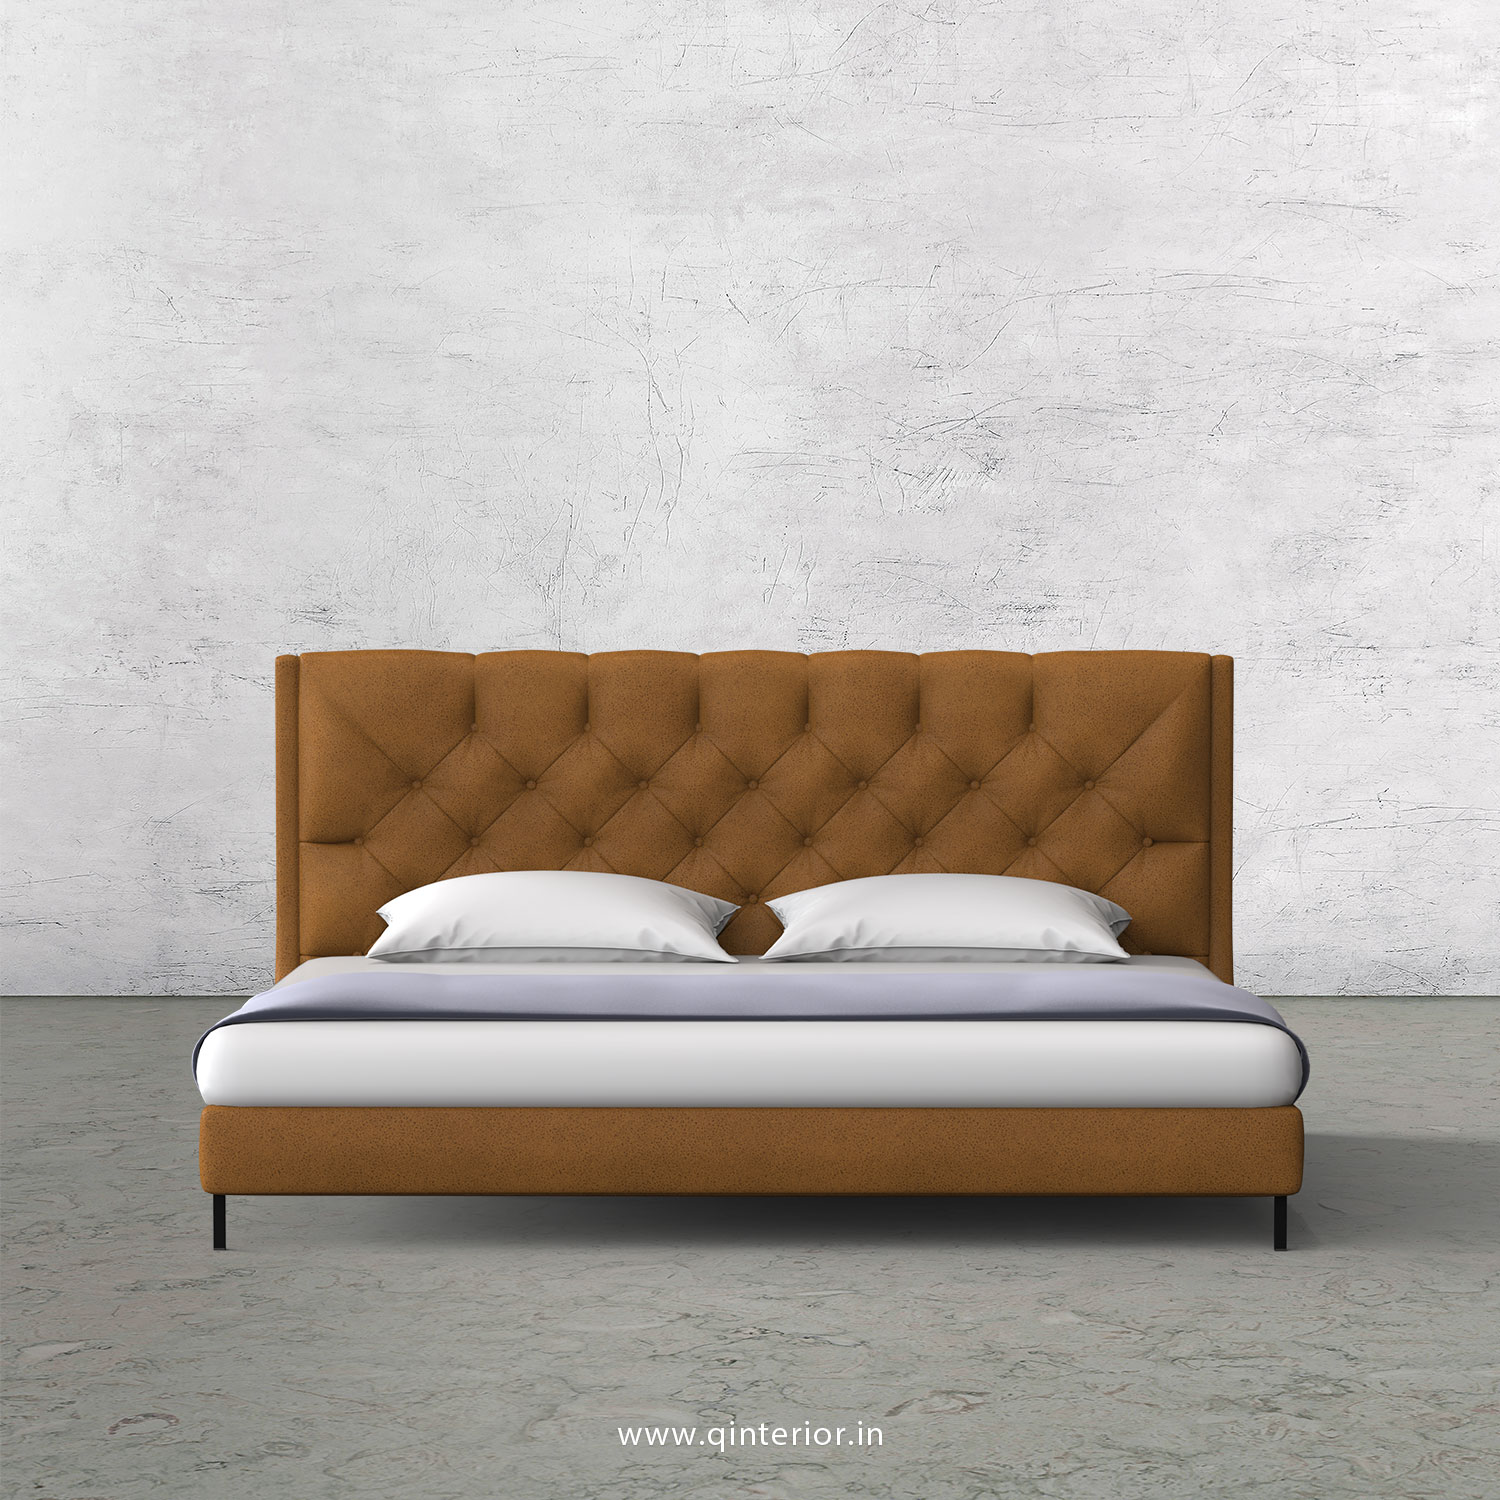 Scorpius King Size Bed in Fab Leather Fabric - KBD003 FL14